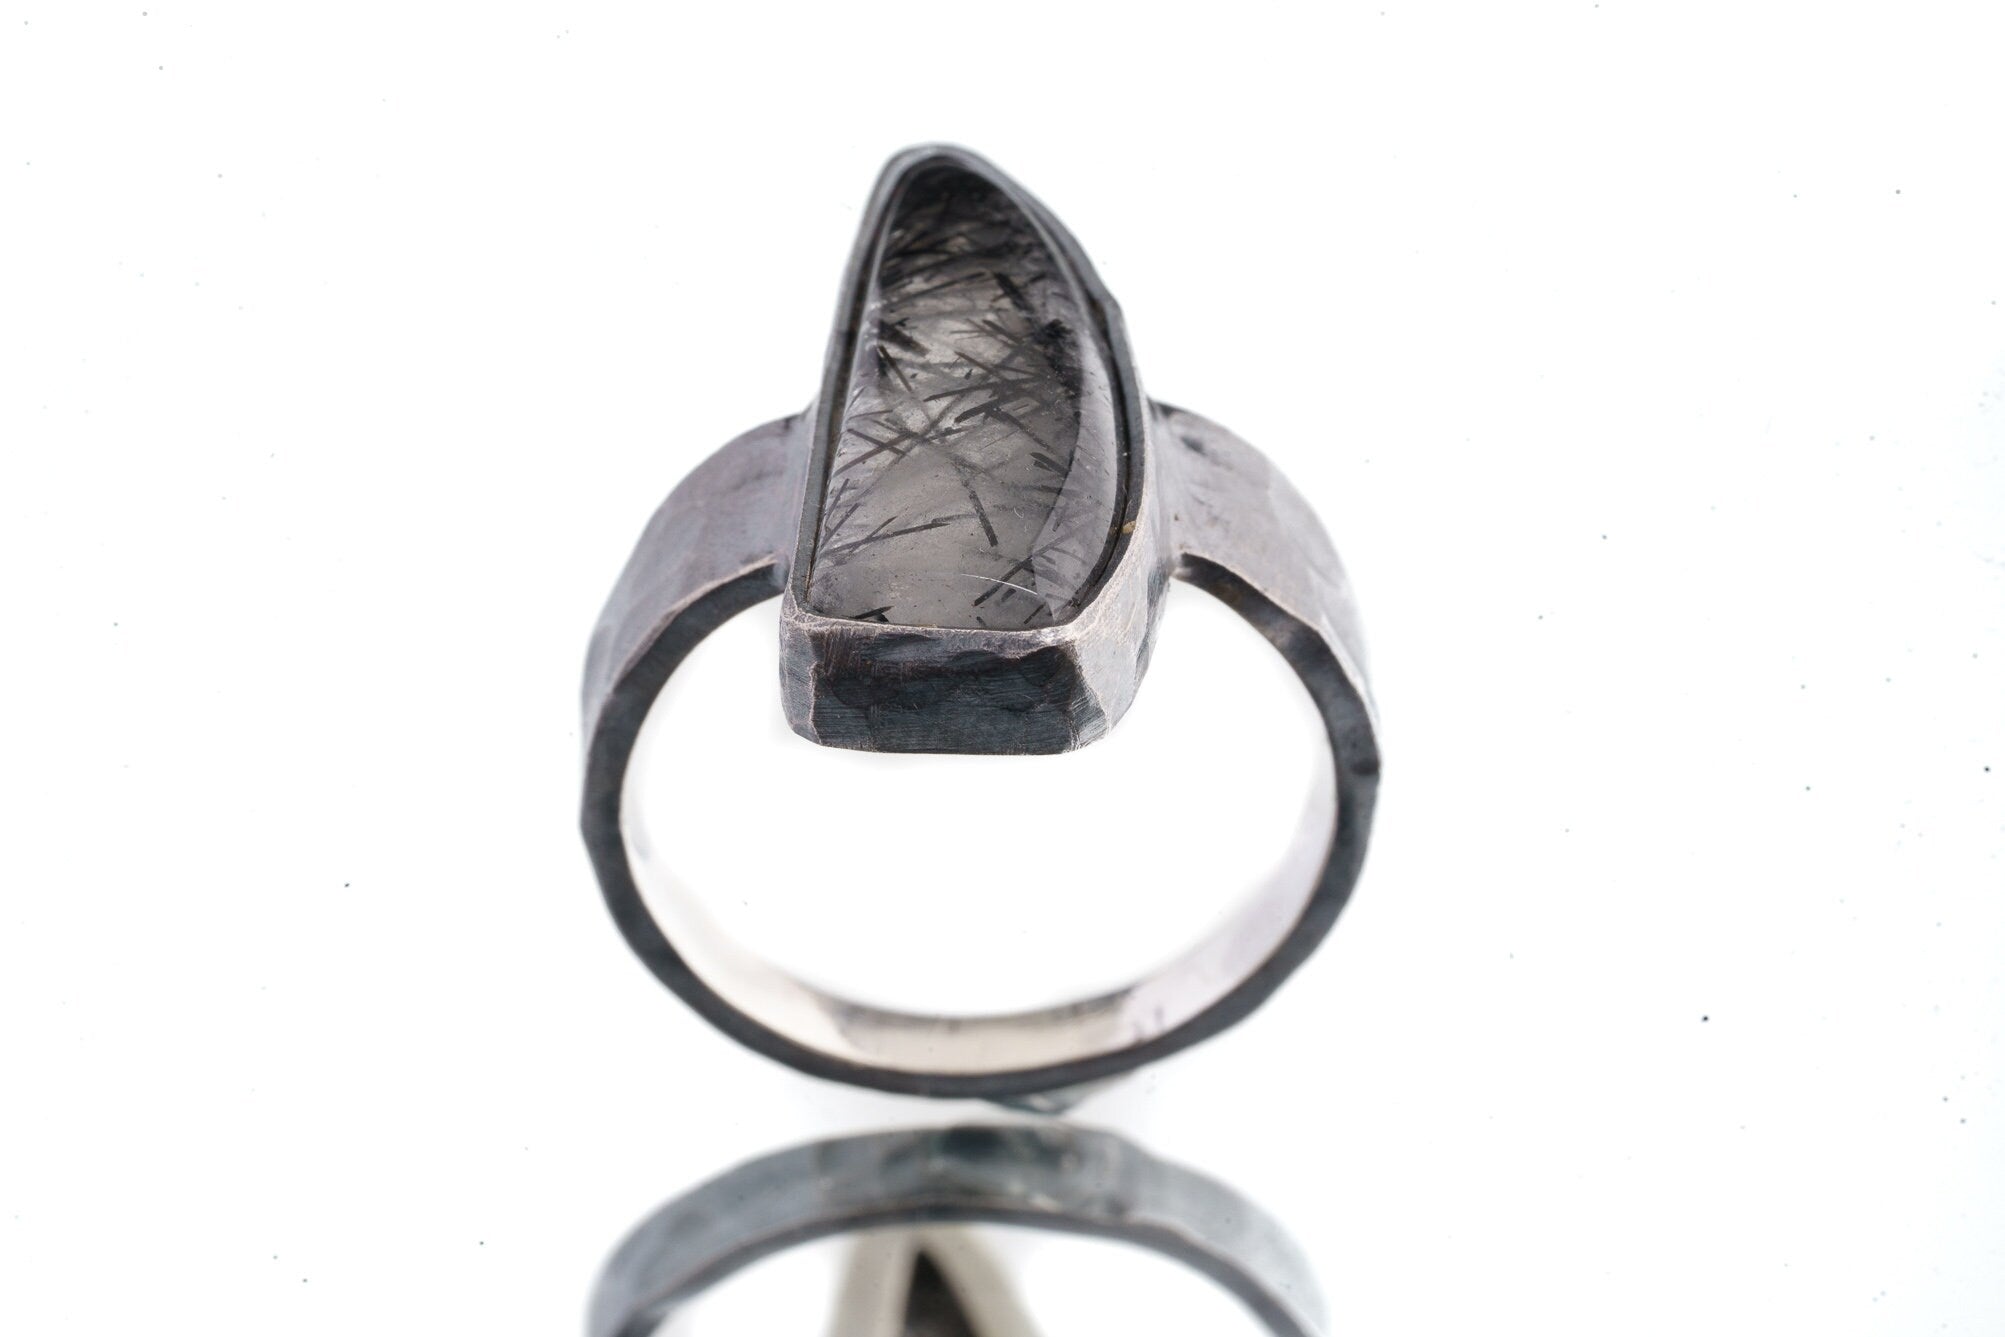 Tooth Black Rutile Quartz Cabochon - Men's / Unisex Large Crystal Ring - Size 12 US - 925 Sterling Silver - Hammer Textured & Oxidised